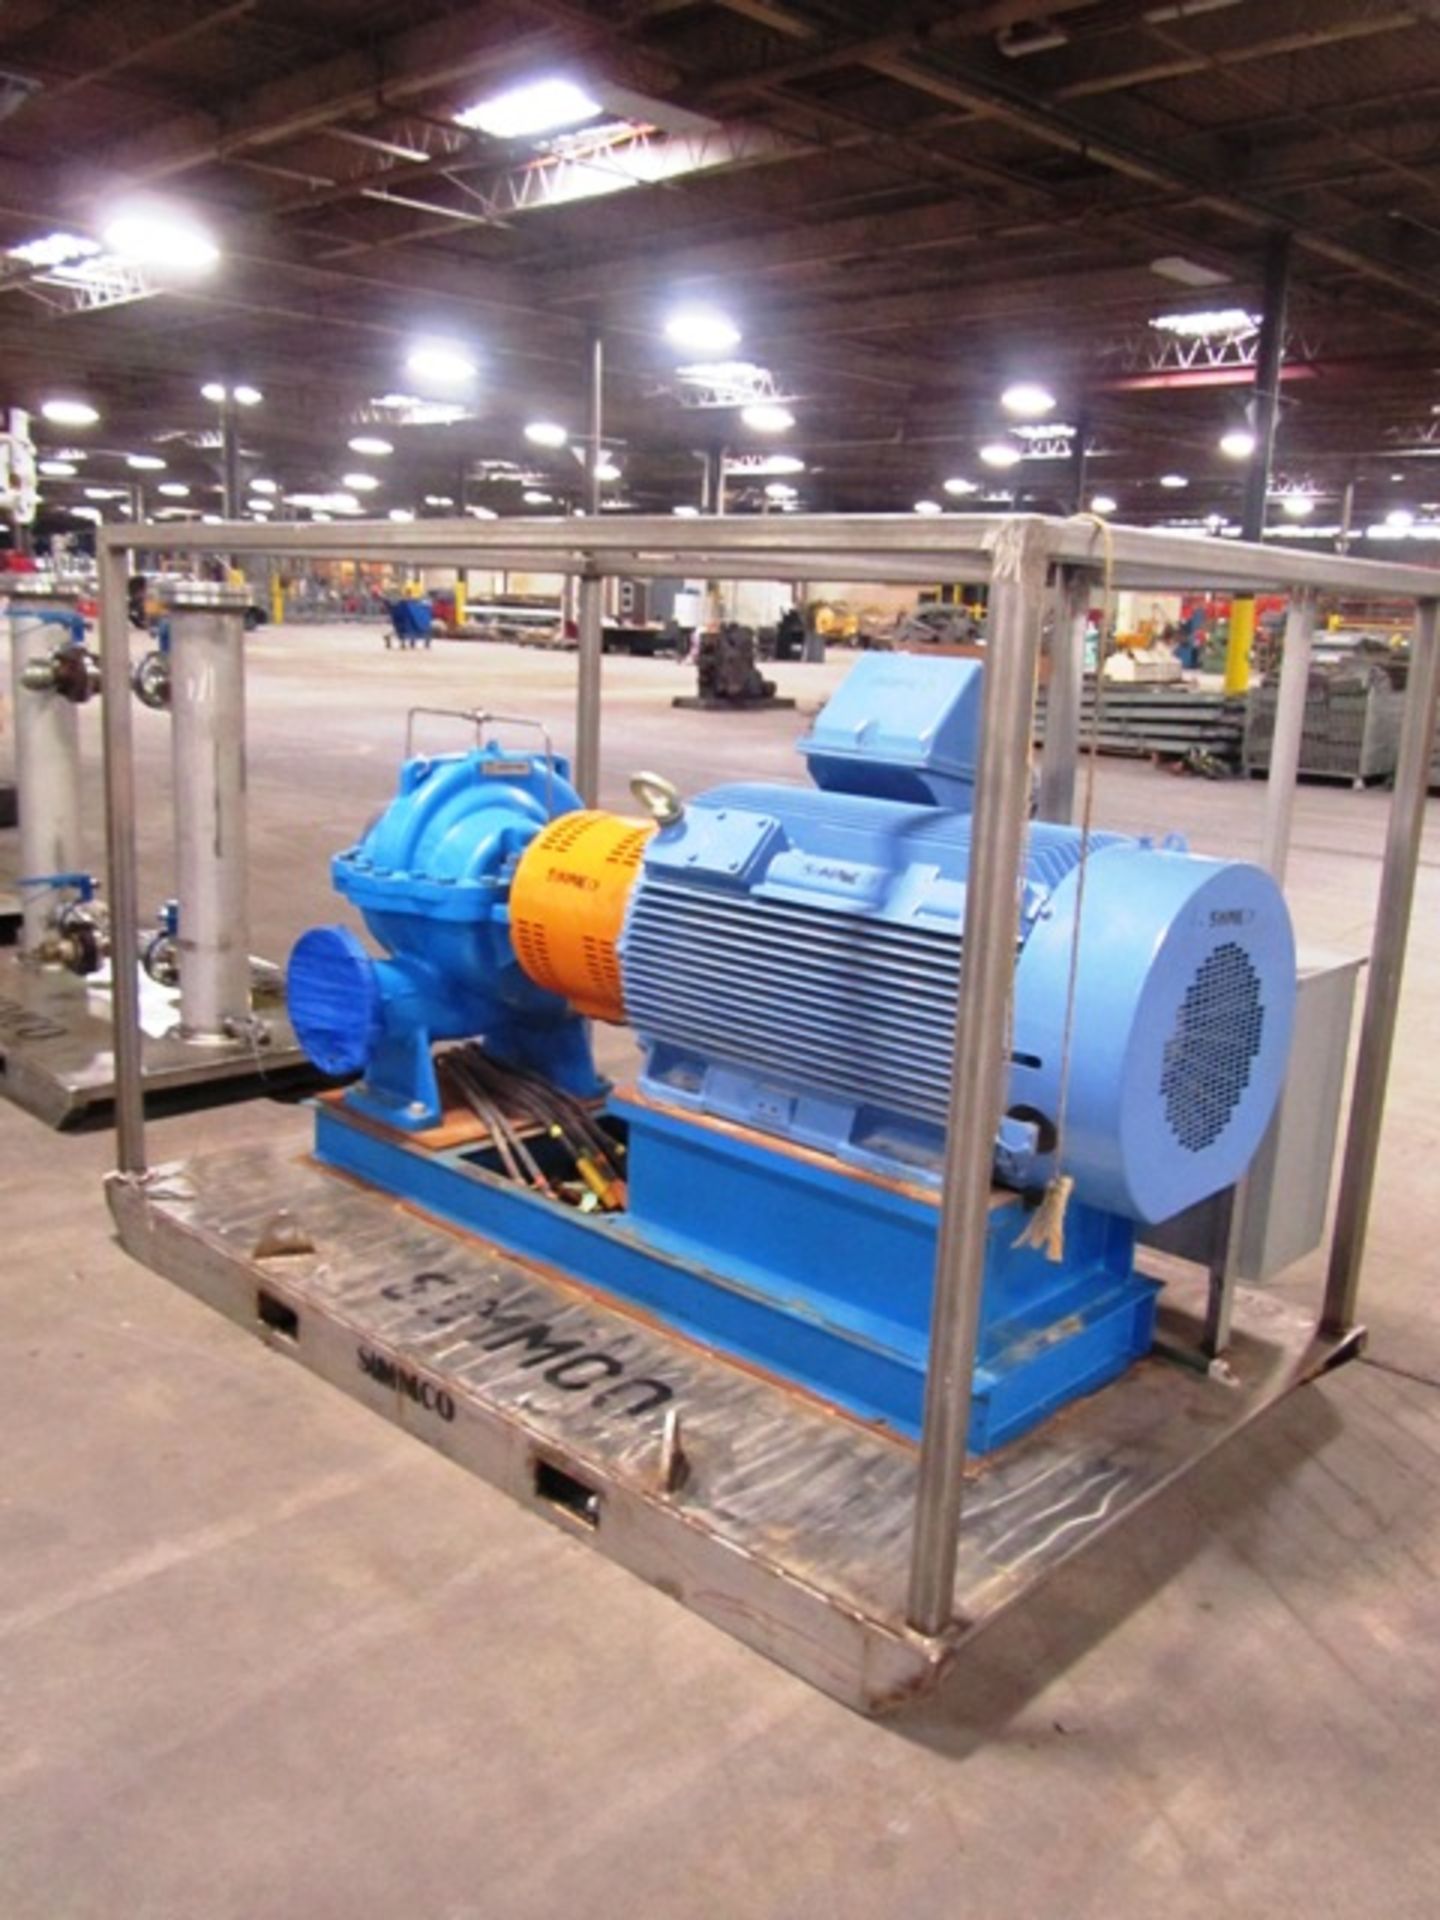 Oil / Water Bypass System consisting of (4) Bypass Splitter Valve Stations, 300 HP Motor, - Image 2 of 4